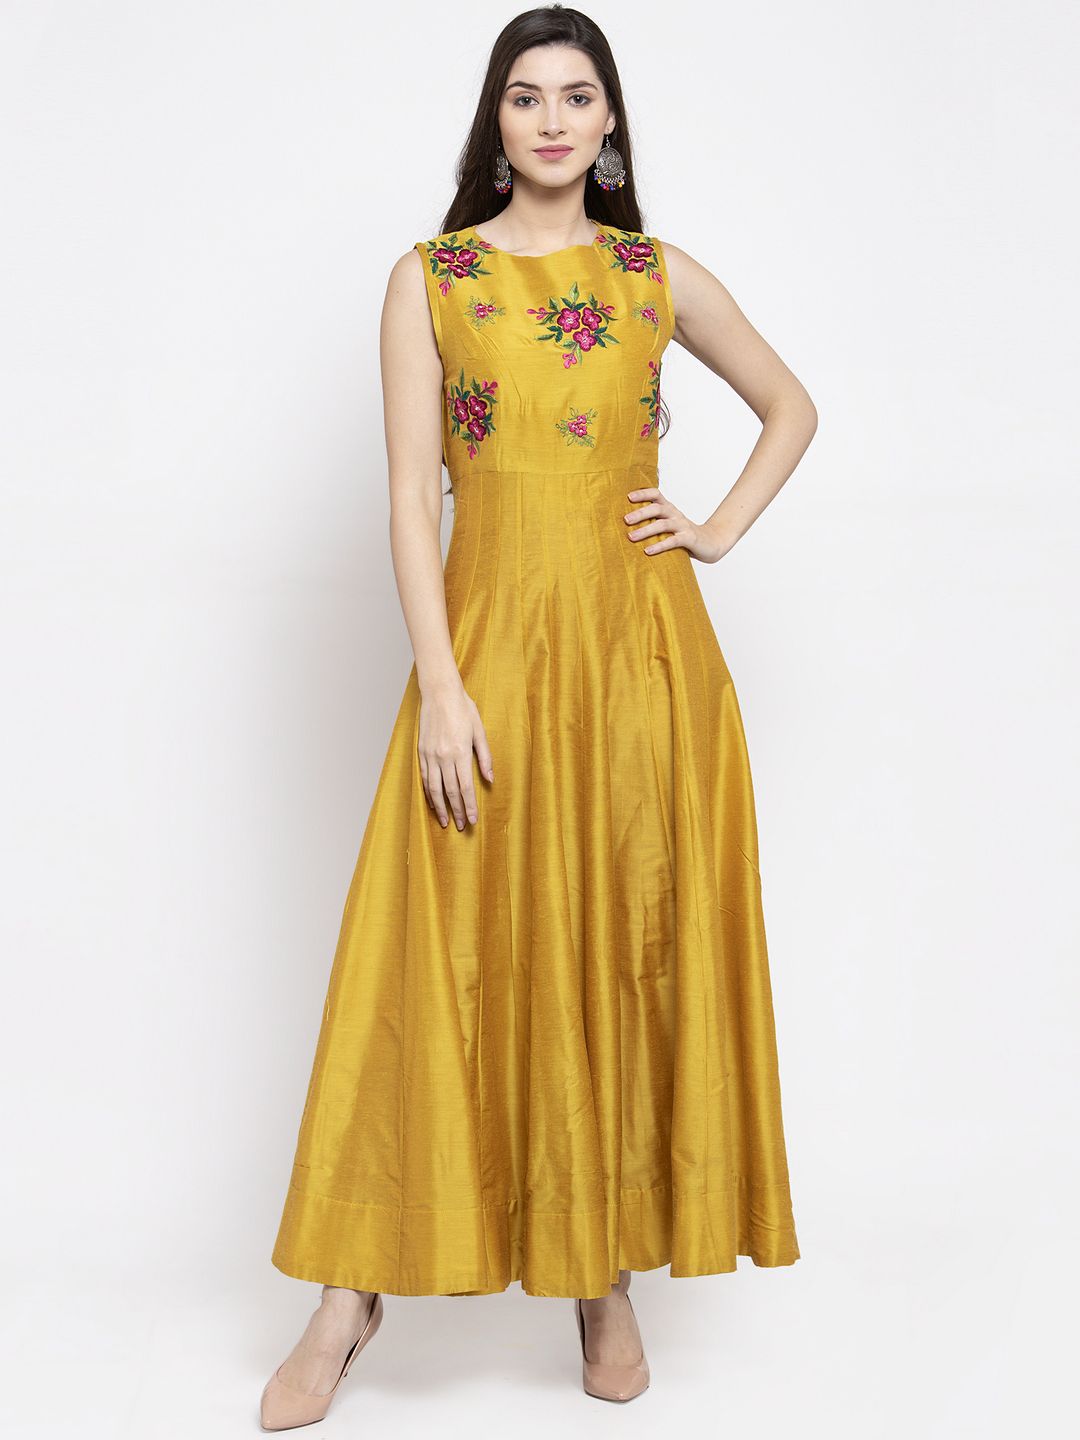 Bhama Couture Women Yellow Floral Printed Maxi Dress Price in India